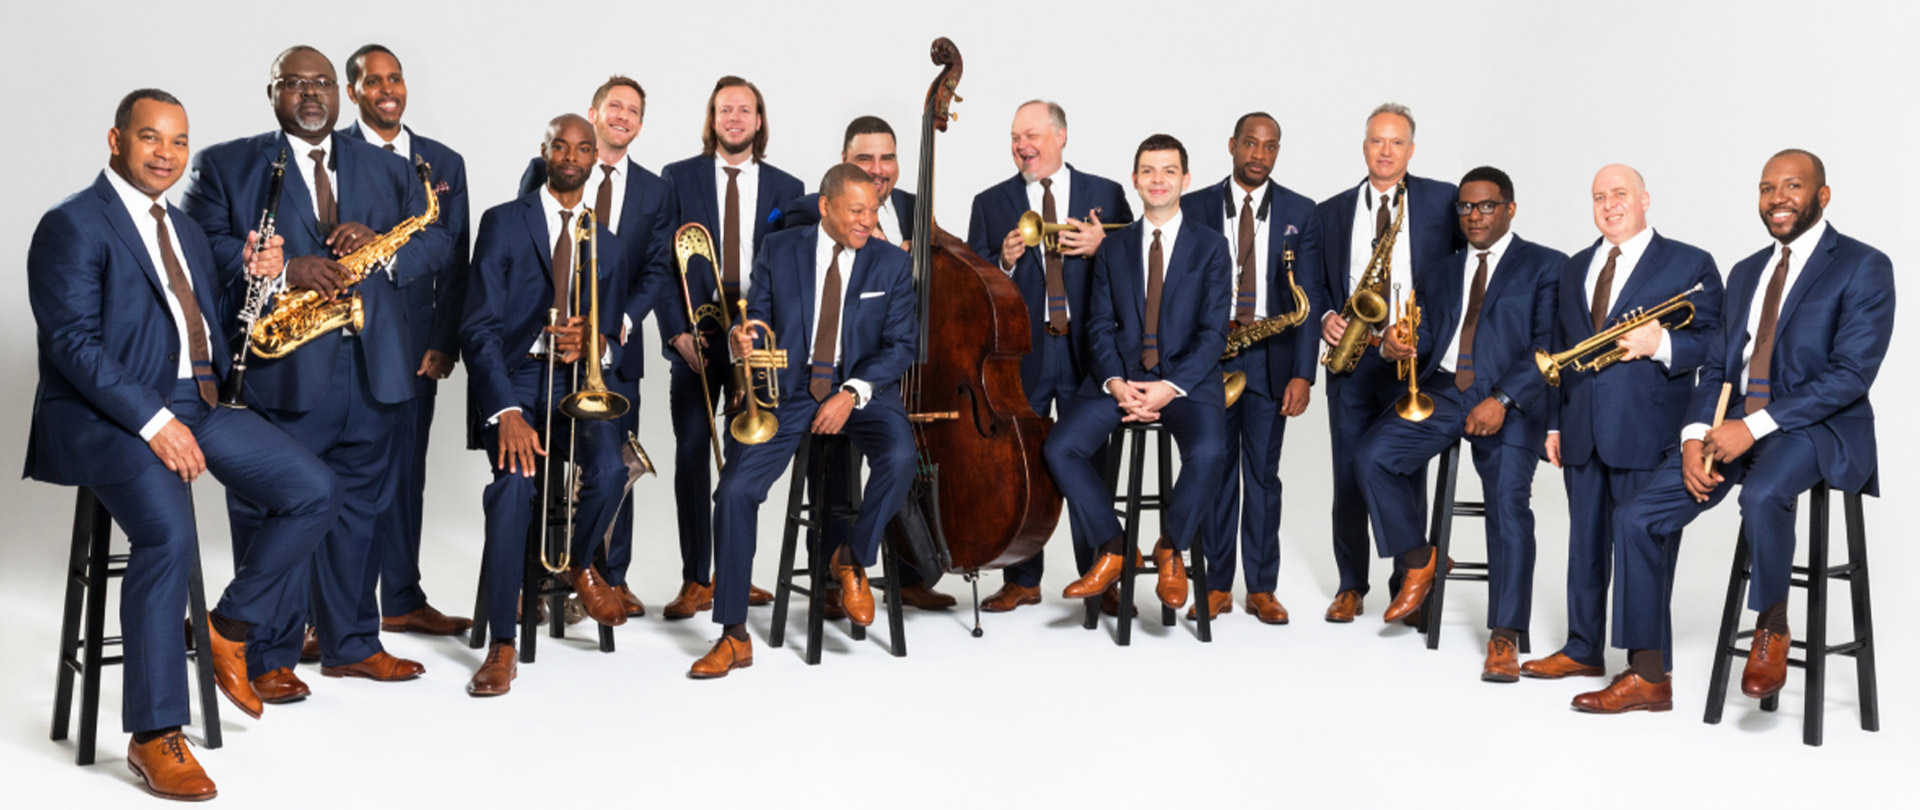 Promotional group photo of Jazz at Lincoln Center Orchestra with Wynton Marsalis